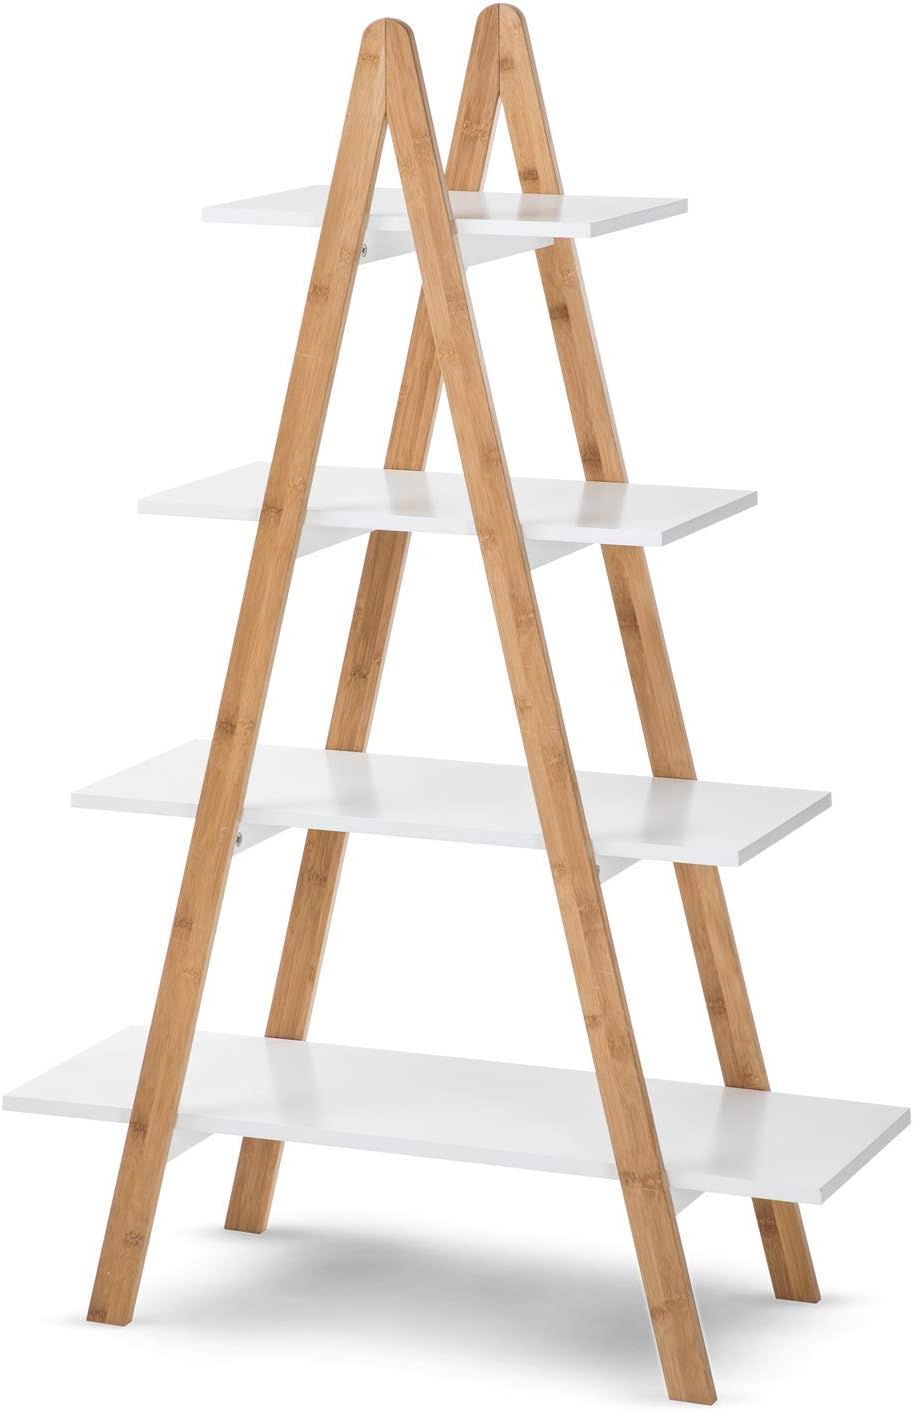 House of Living Art White Ladder Shelf - 4 Tier Bamboo and MDF Shelving, A-Shaped | Amazon (US)